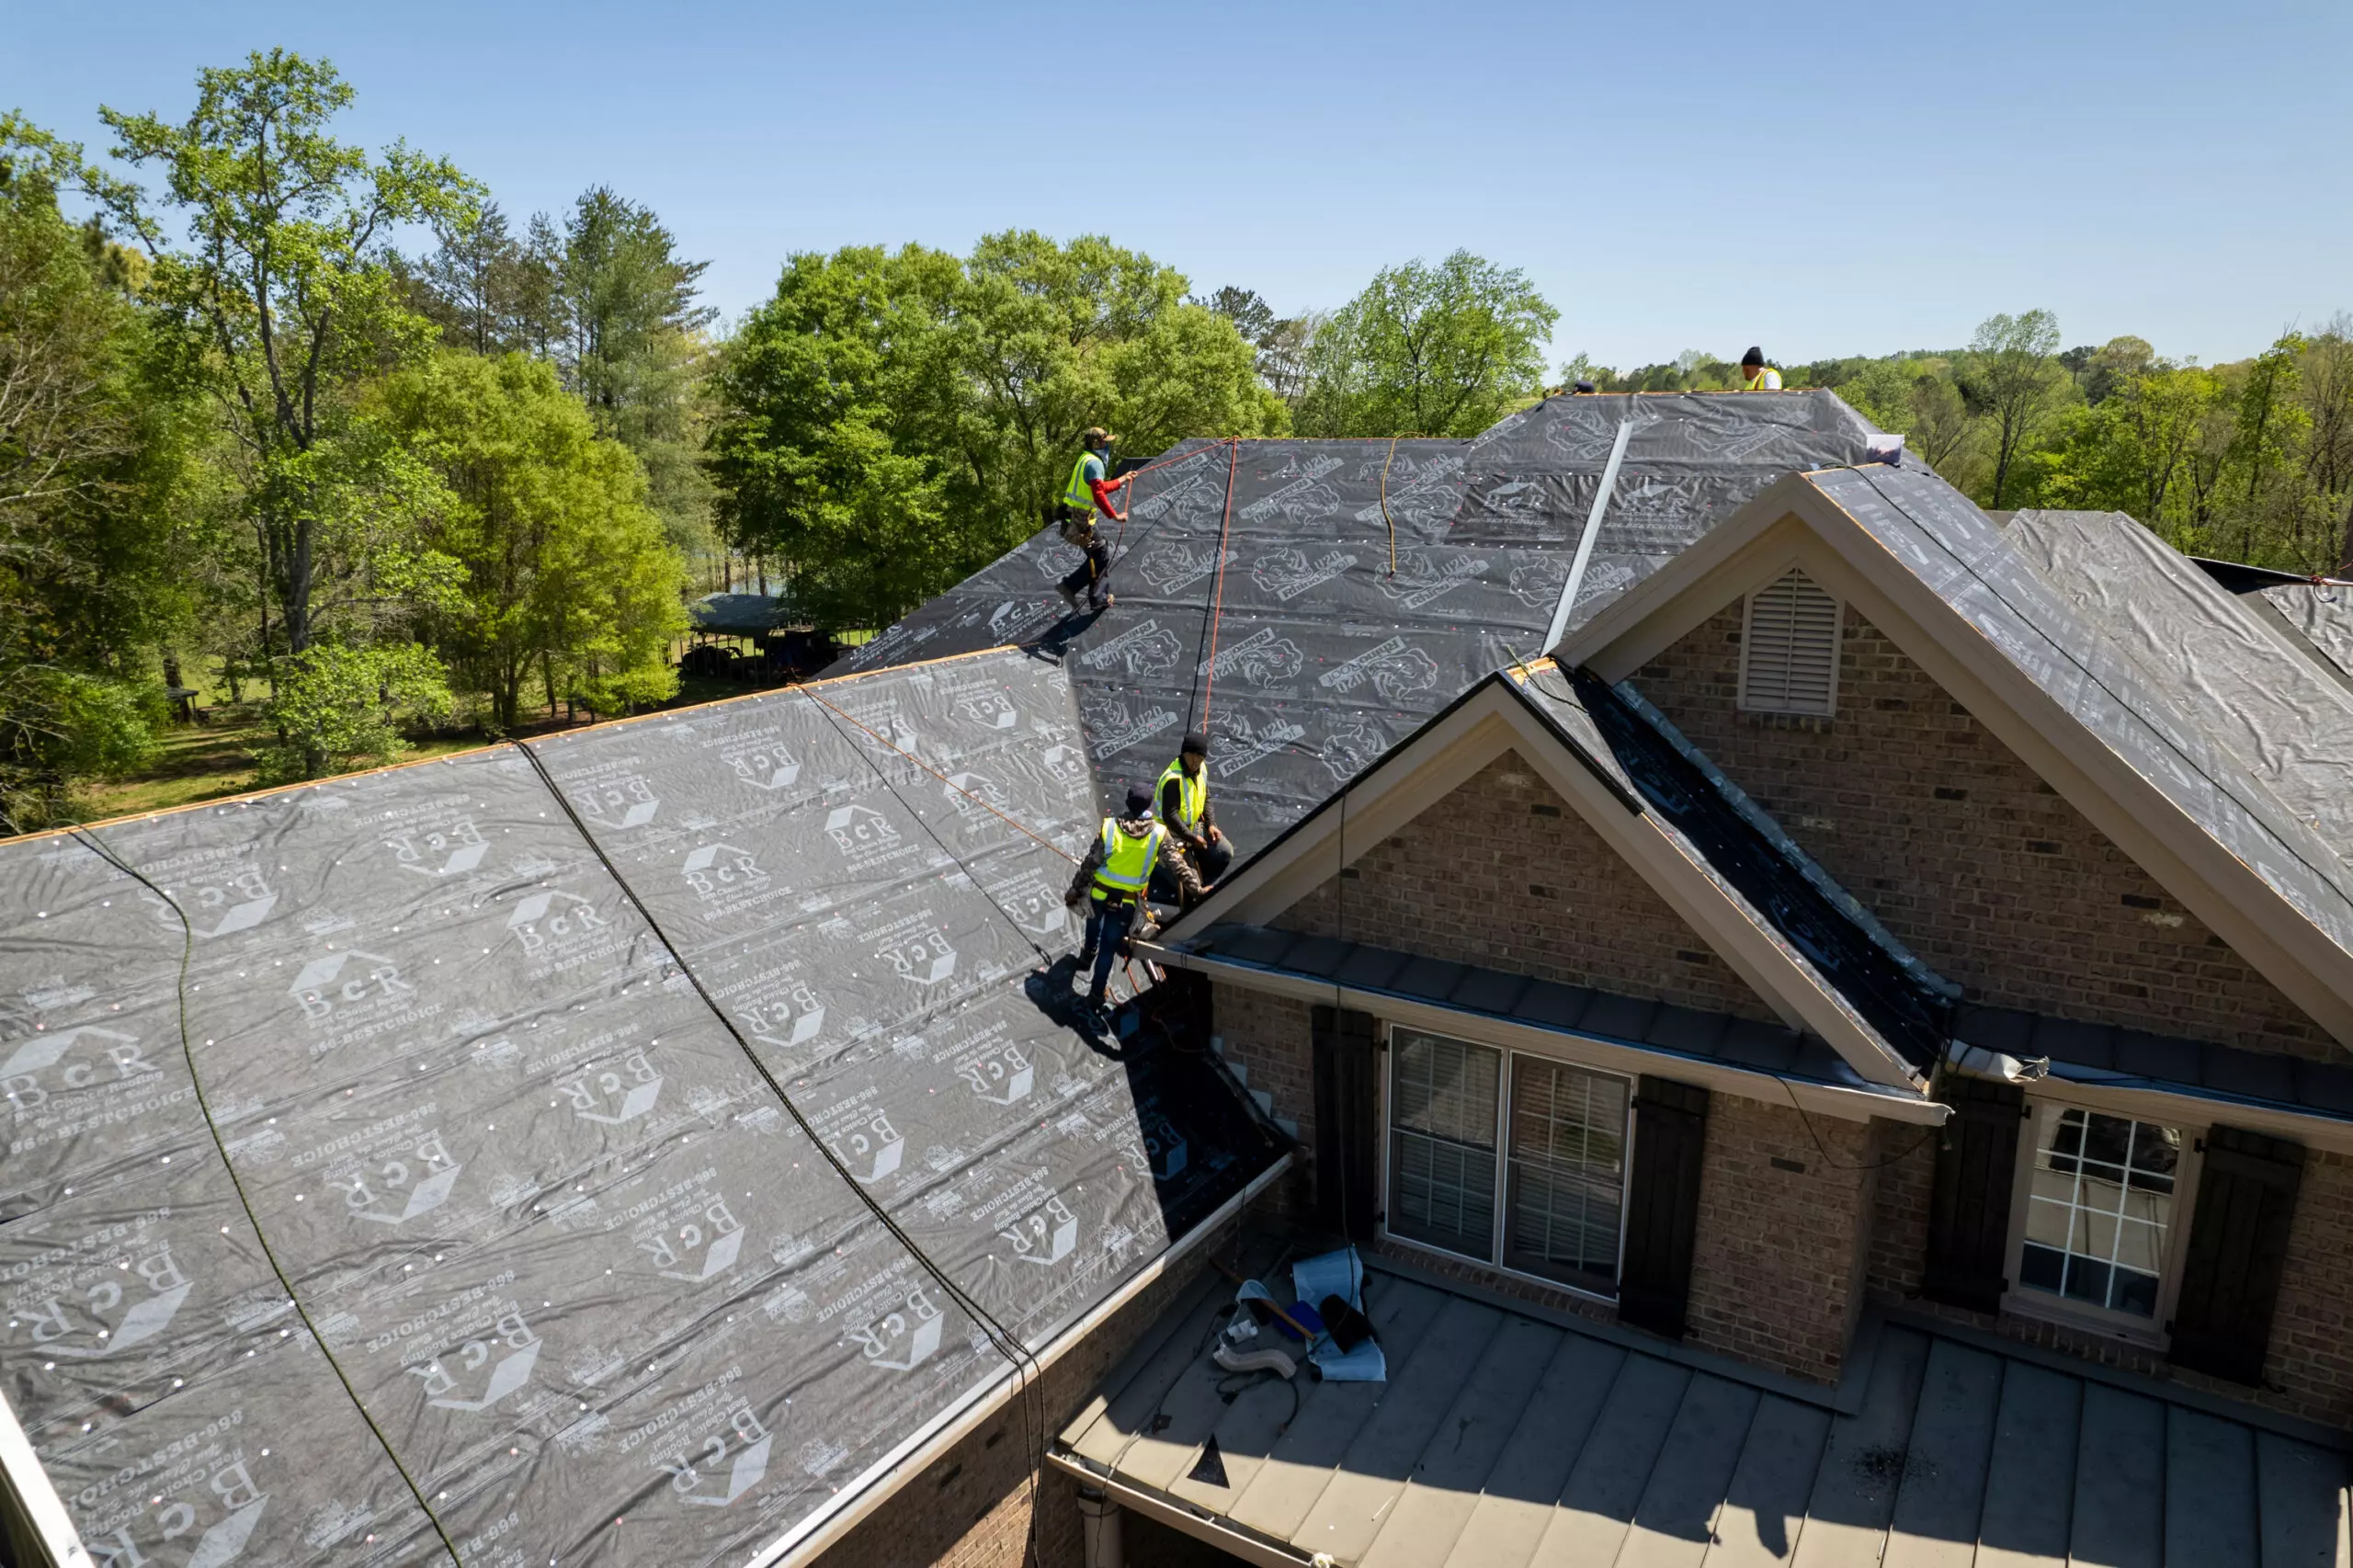 Roof Replacement & Free Inspections - Best Choice Roofing